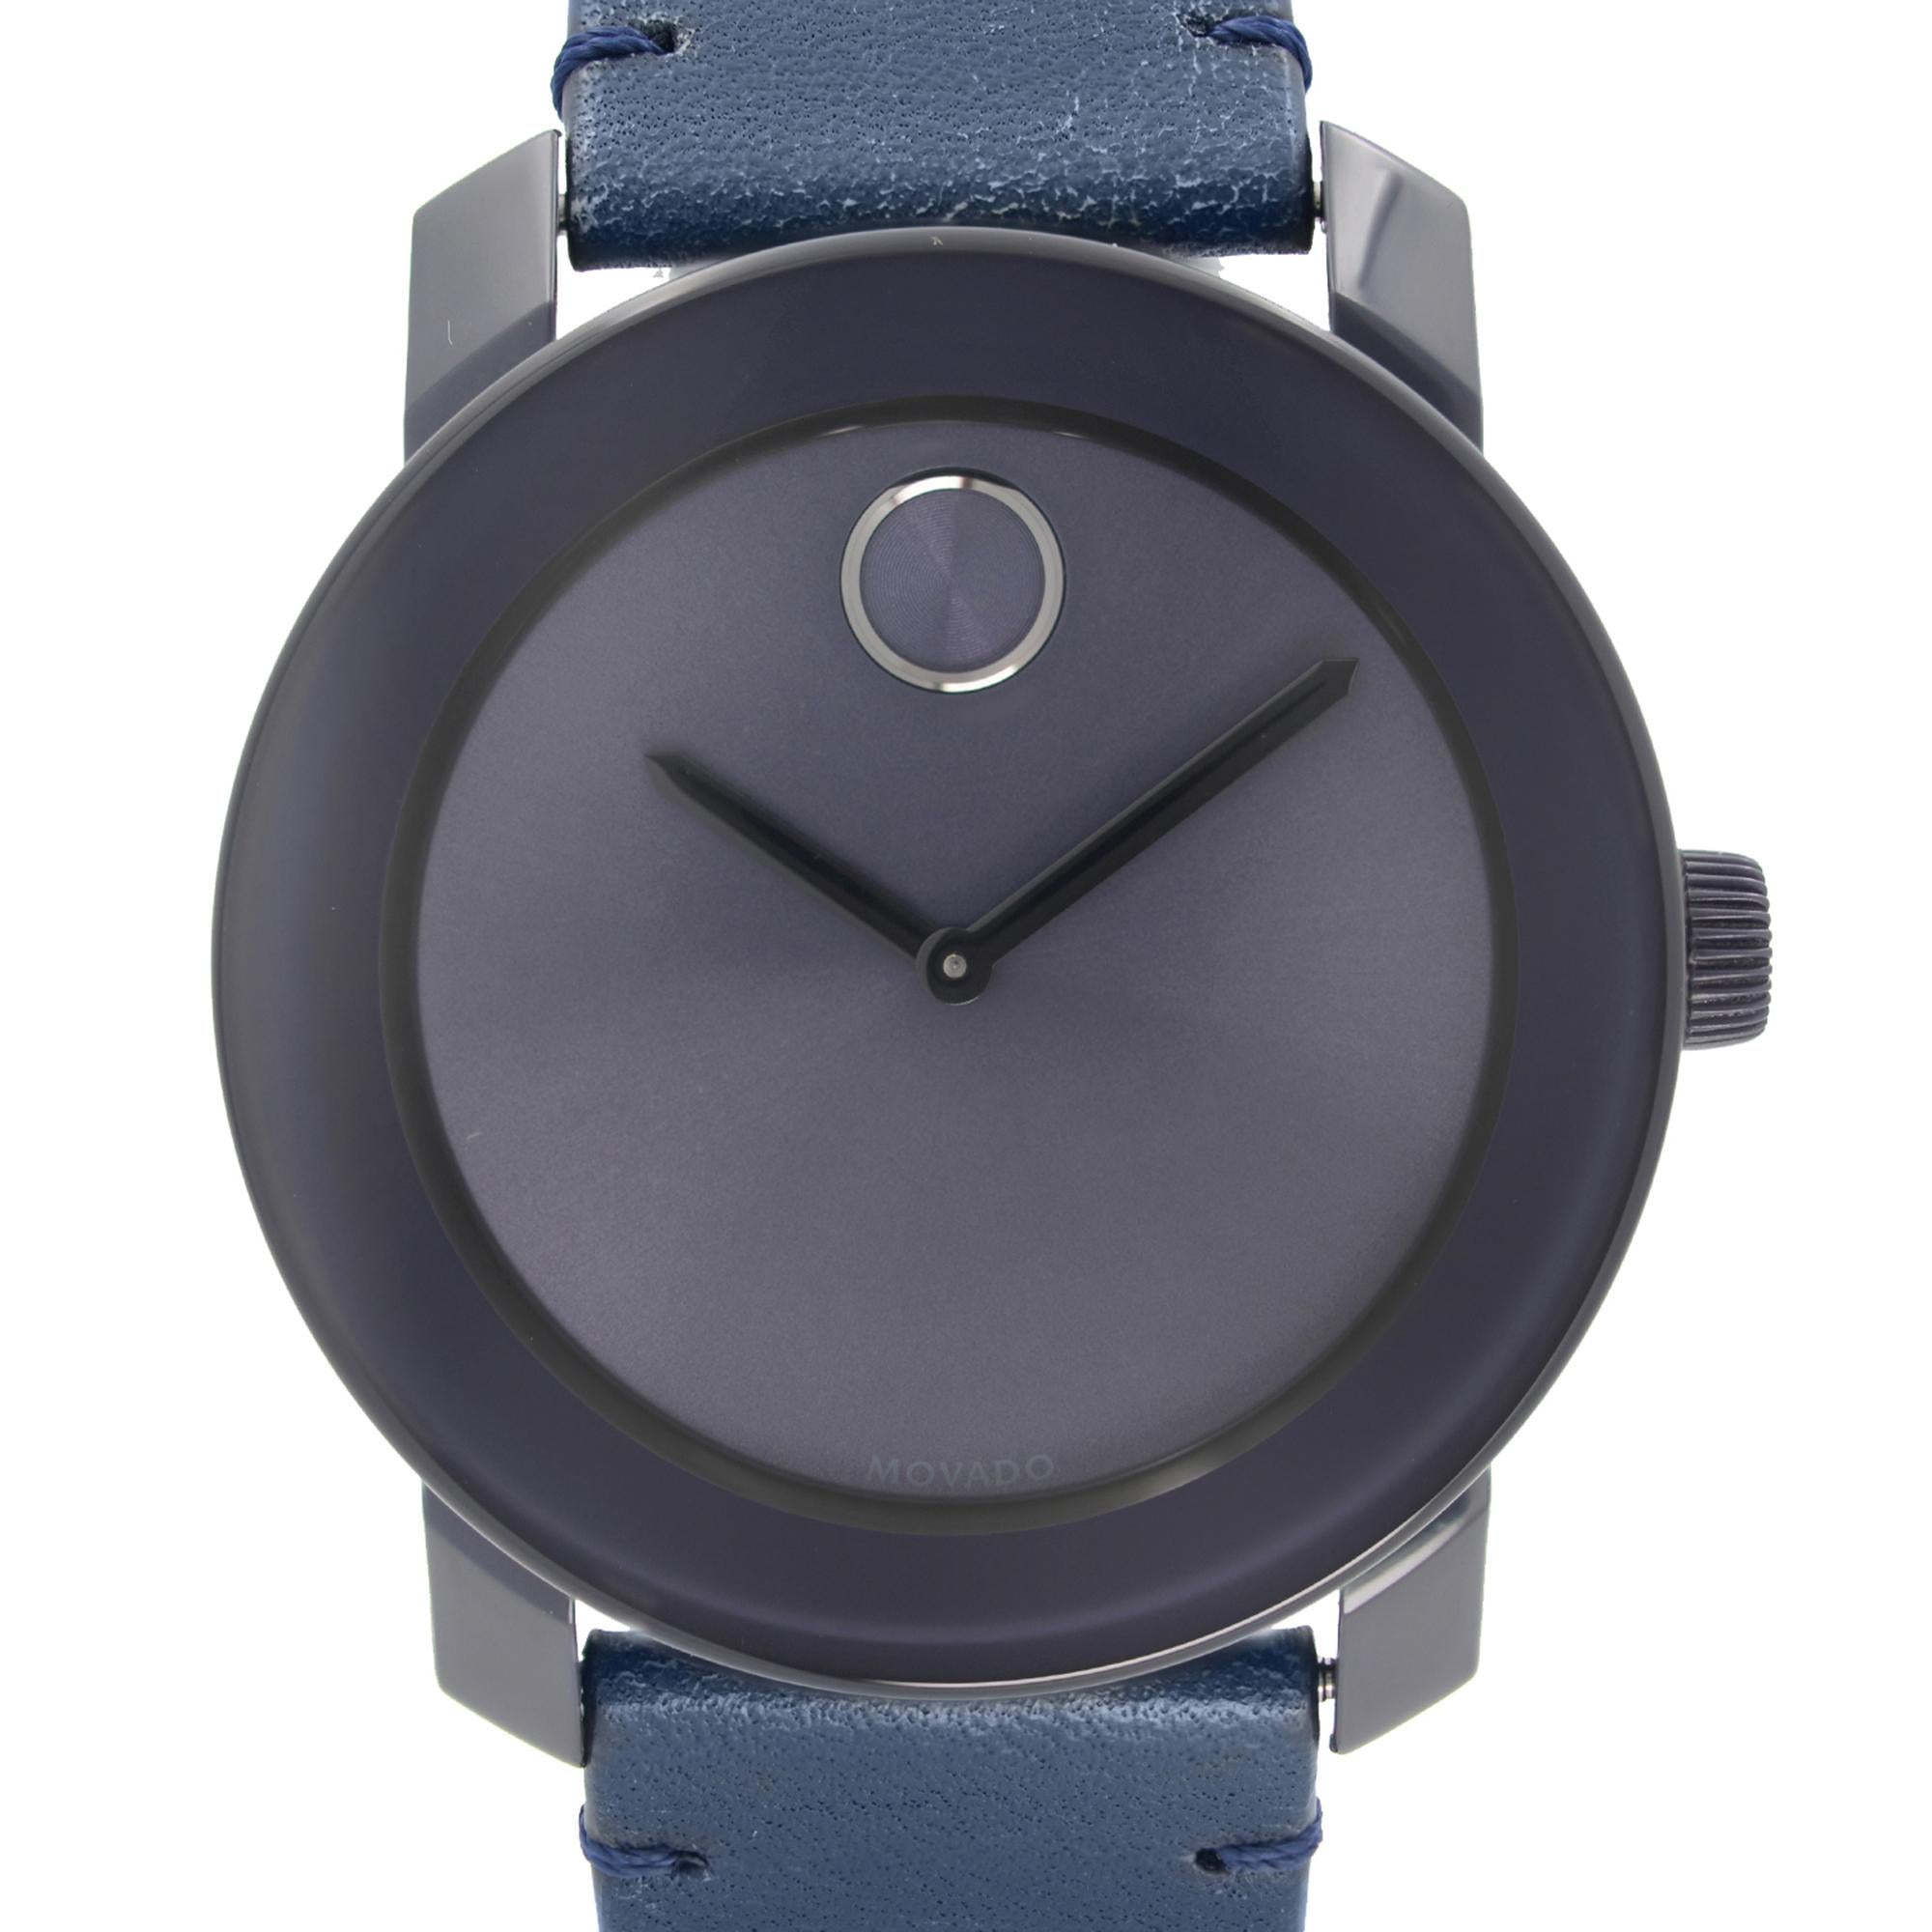 Pre Owned Movado Bold Steel Navy Blue Dial Leather Strap Men's Quartz Watch 3600370. This watch was never owned but has a few insignificant blemishes on plastic surfaces and the inner side of the strap due to storage and aging. This Beautiful